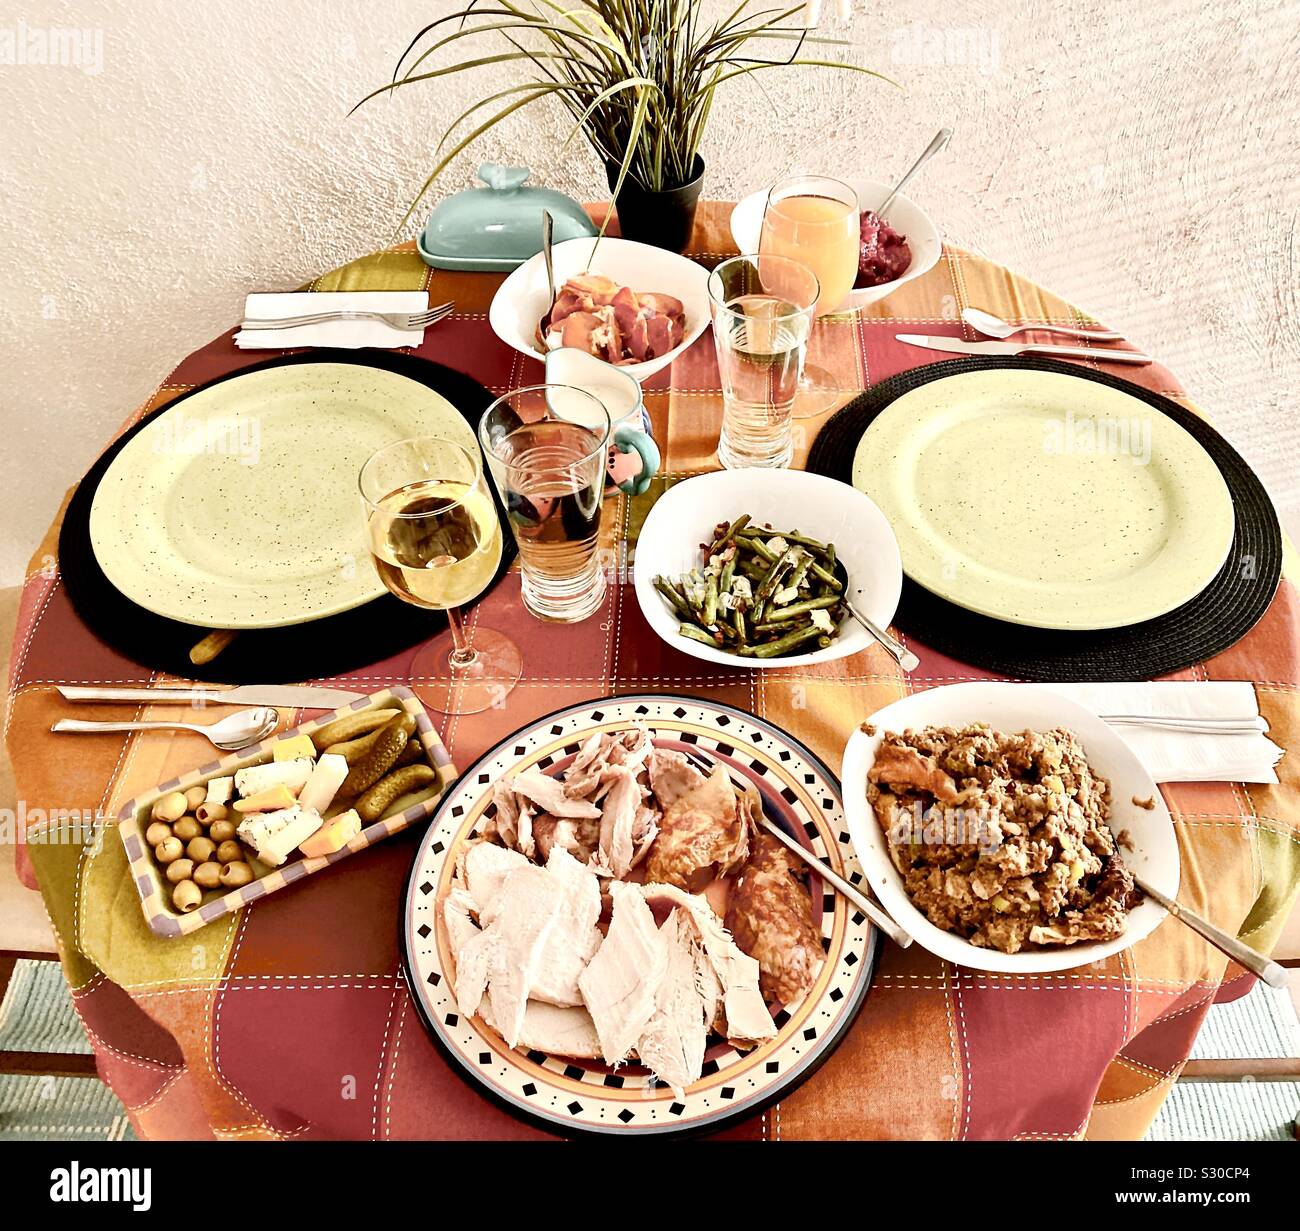 Thanksgiving dinner for two Stock Photo - Alamy